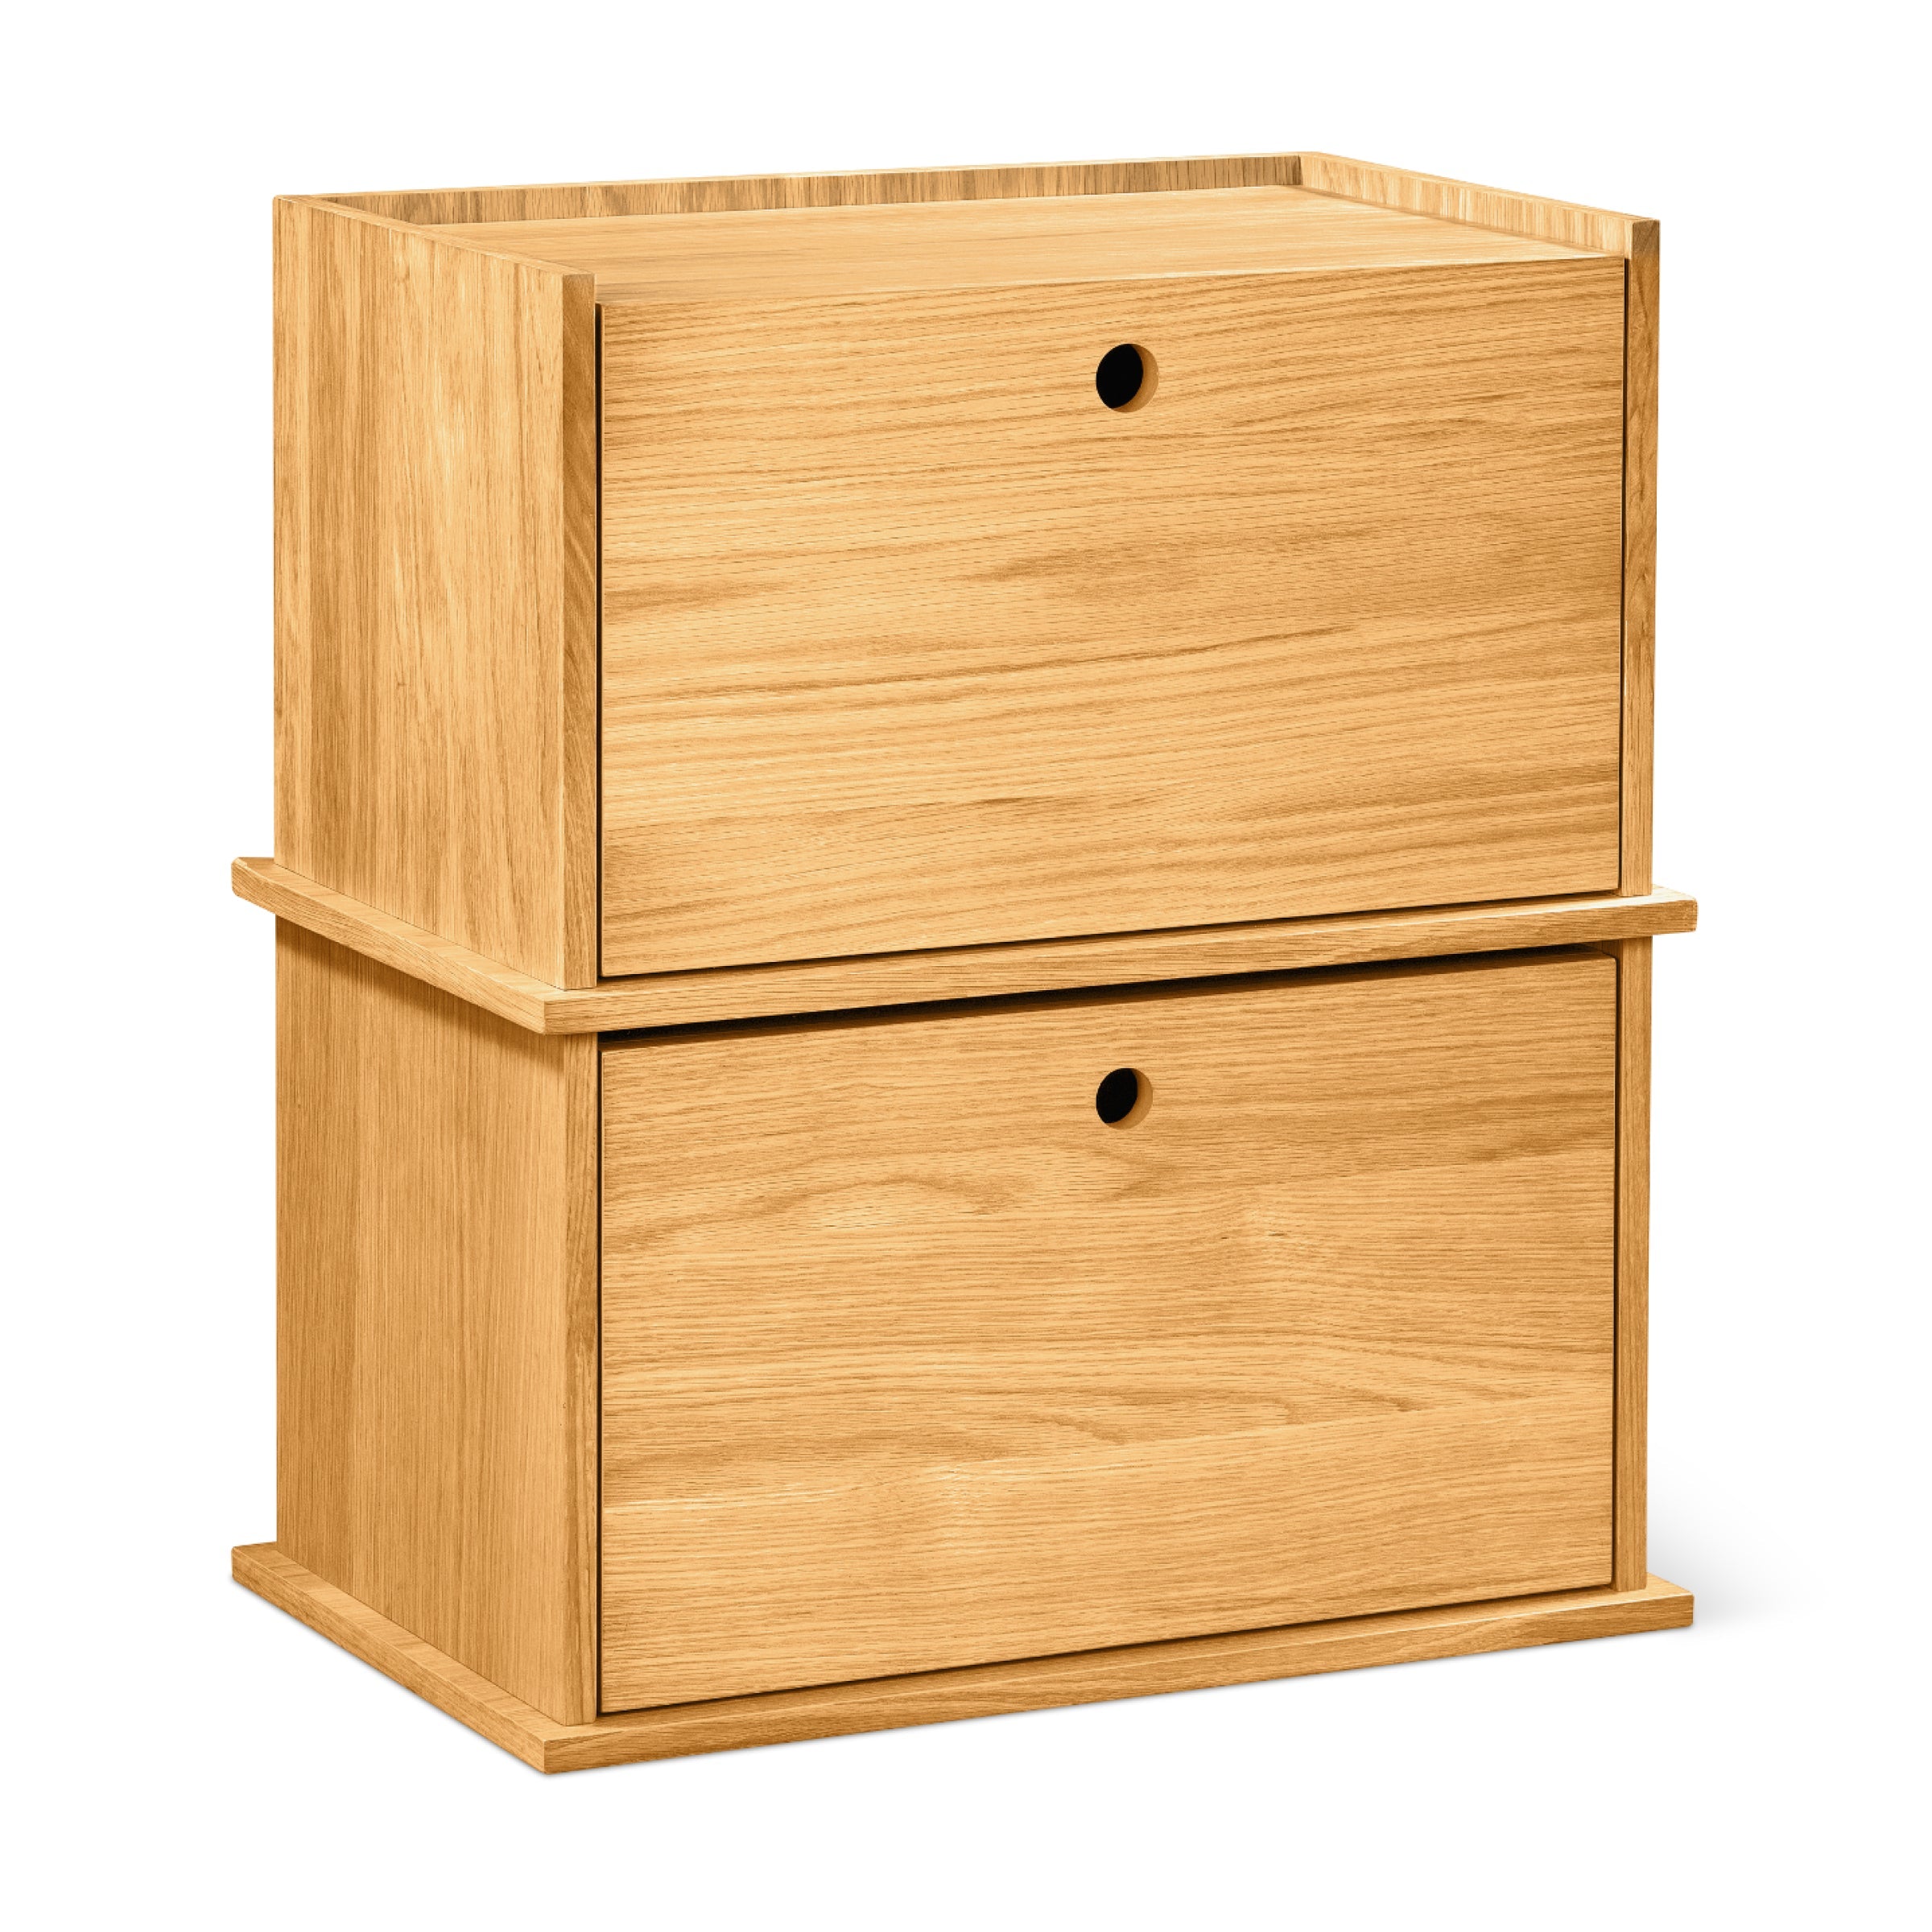 Keep Stacking Storage System 2-Piece, Closed, Oak - Image 14